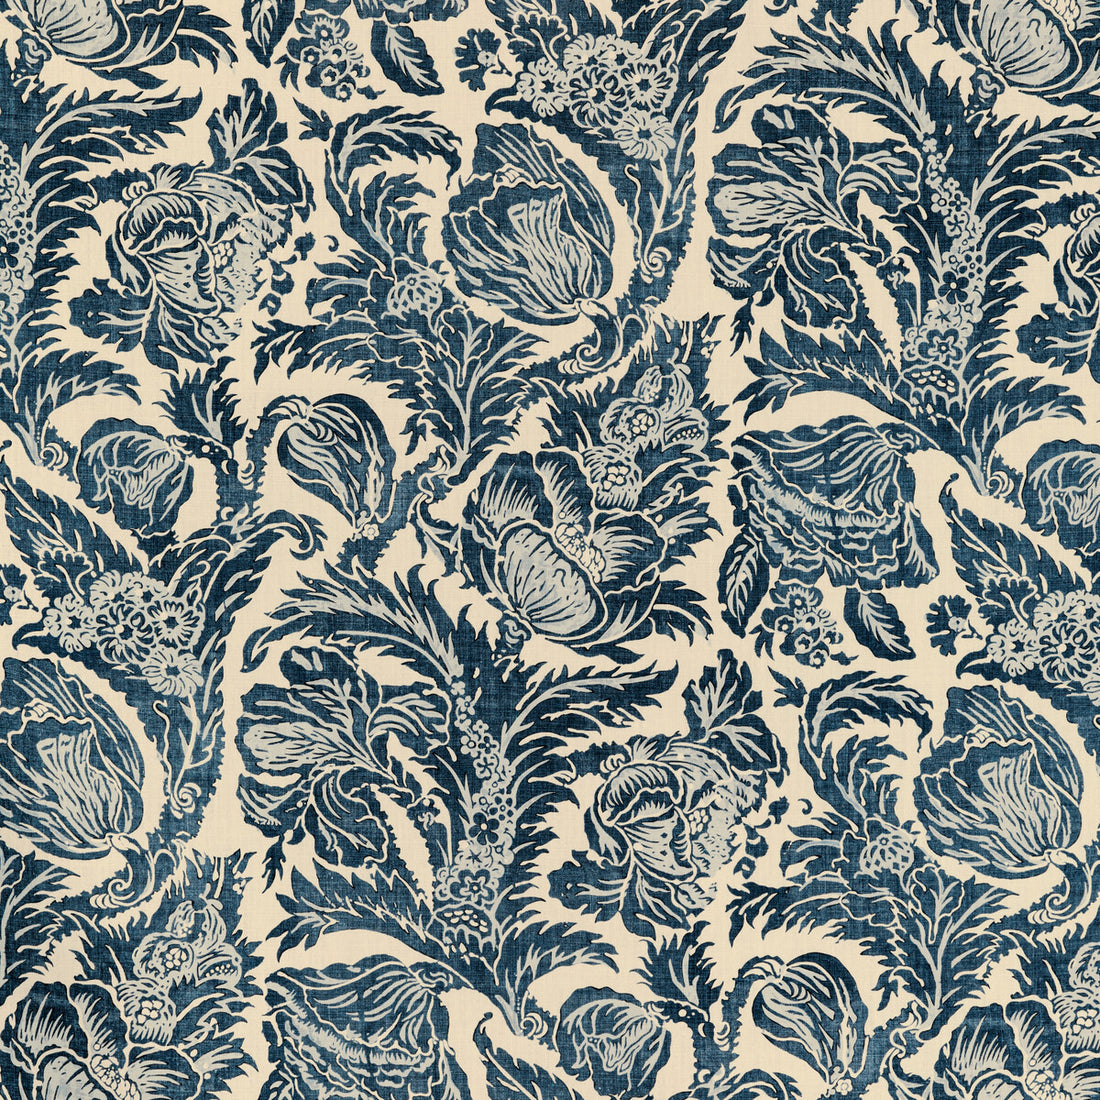 Marion Print fabric in indigo color - pattern 2020205.50.0 - by Lee Jofa in the Breckenridge collection